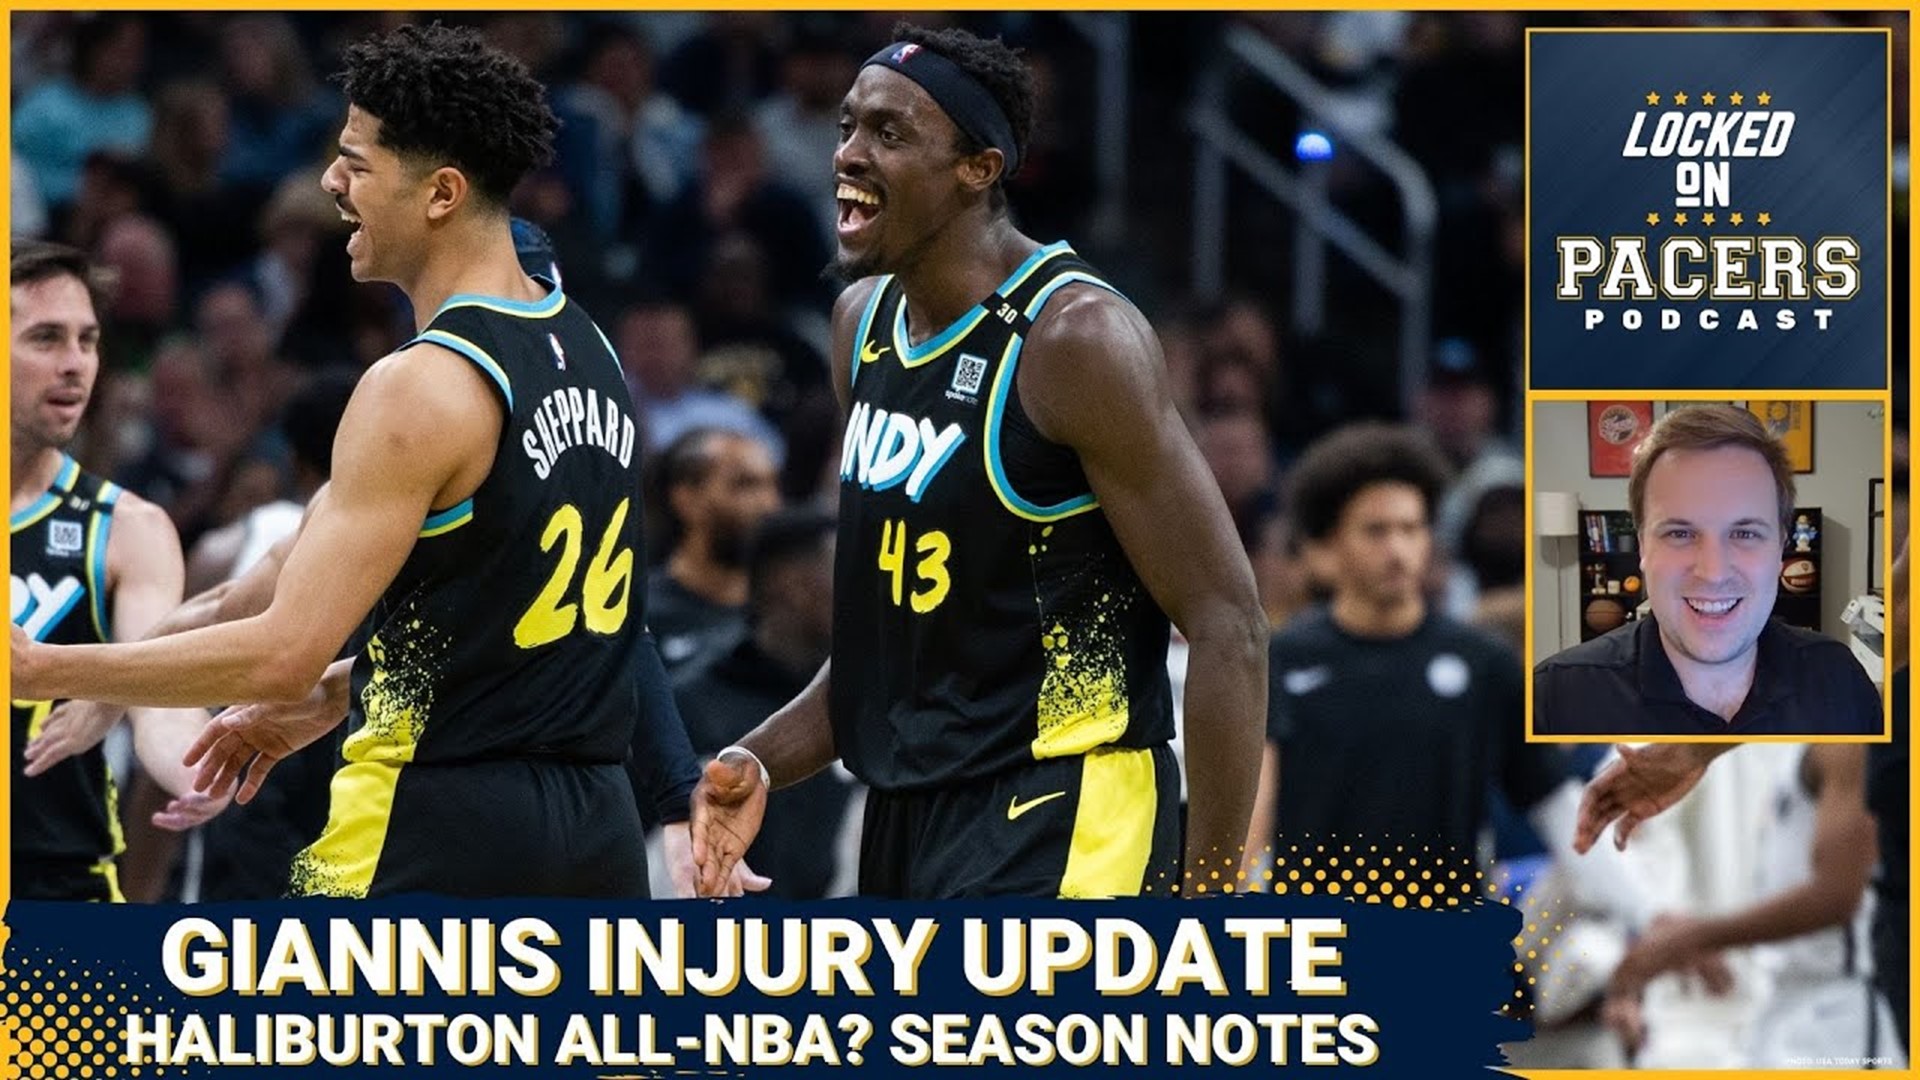 How Giannis Antetokounmpo injury could change Pacers vs Bucks + Play-In hopes and more season notes